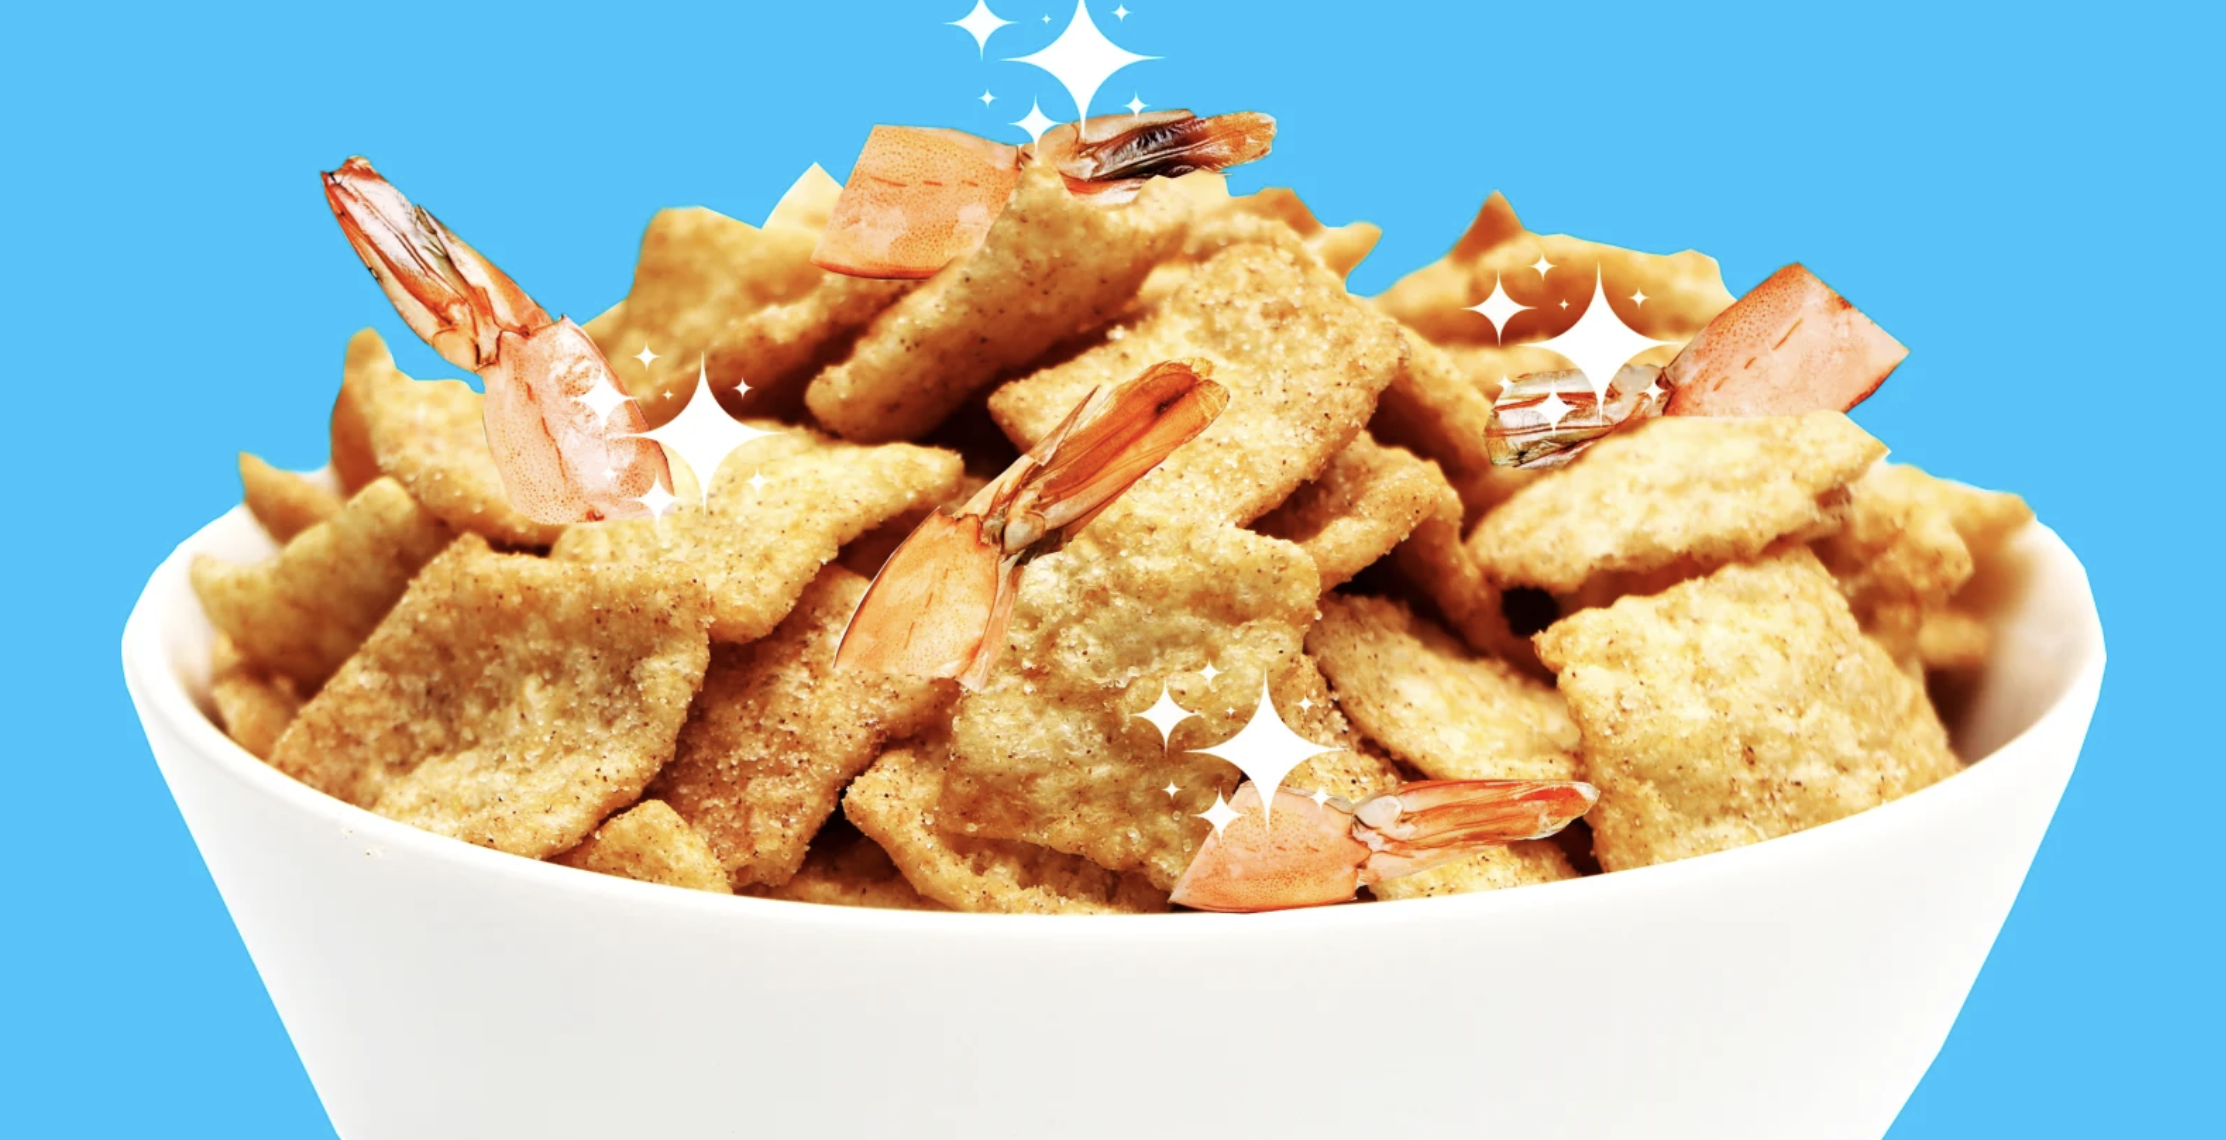 Cinnamon Toast Prawn Isn’t Real, Probably, and Neither Are These Urban Food Legends